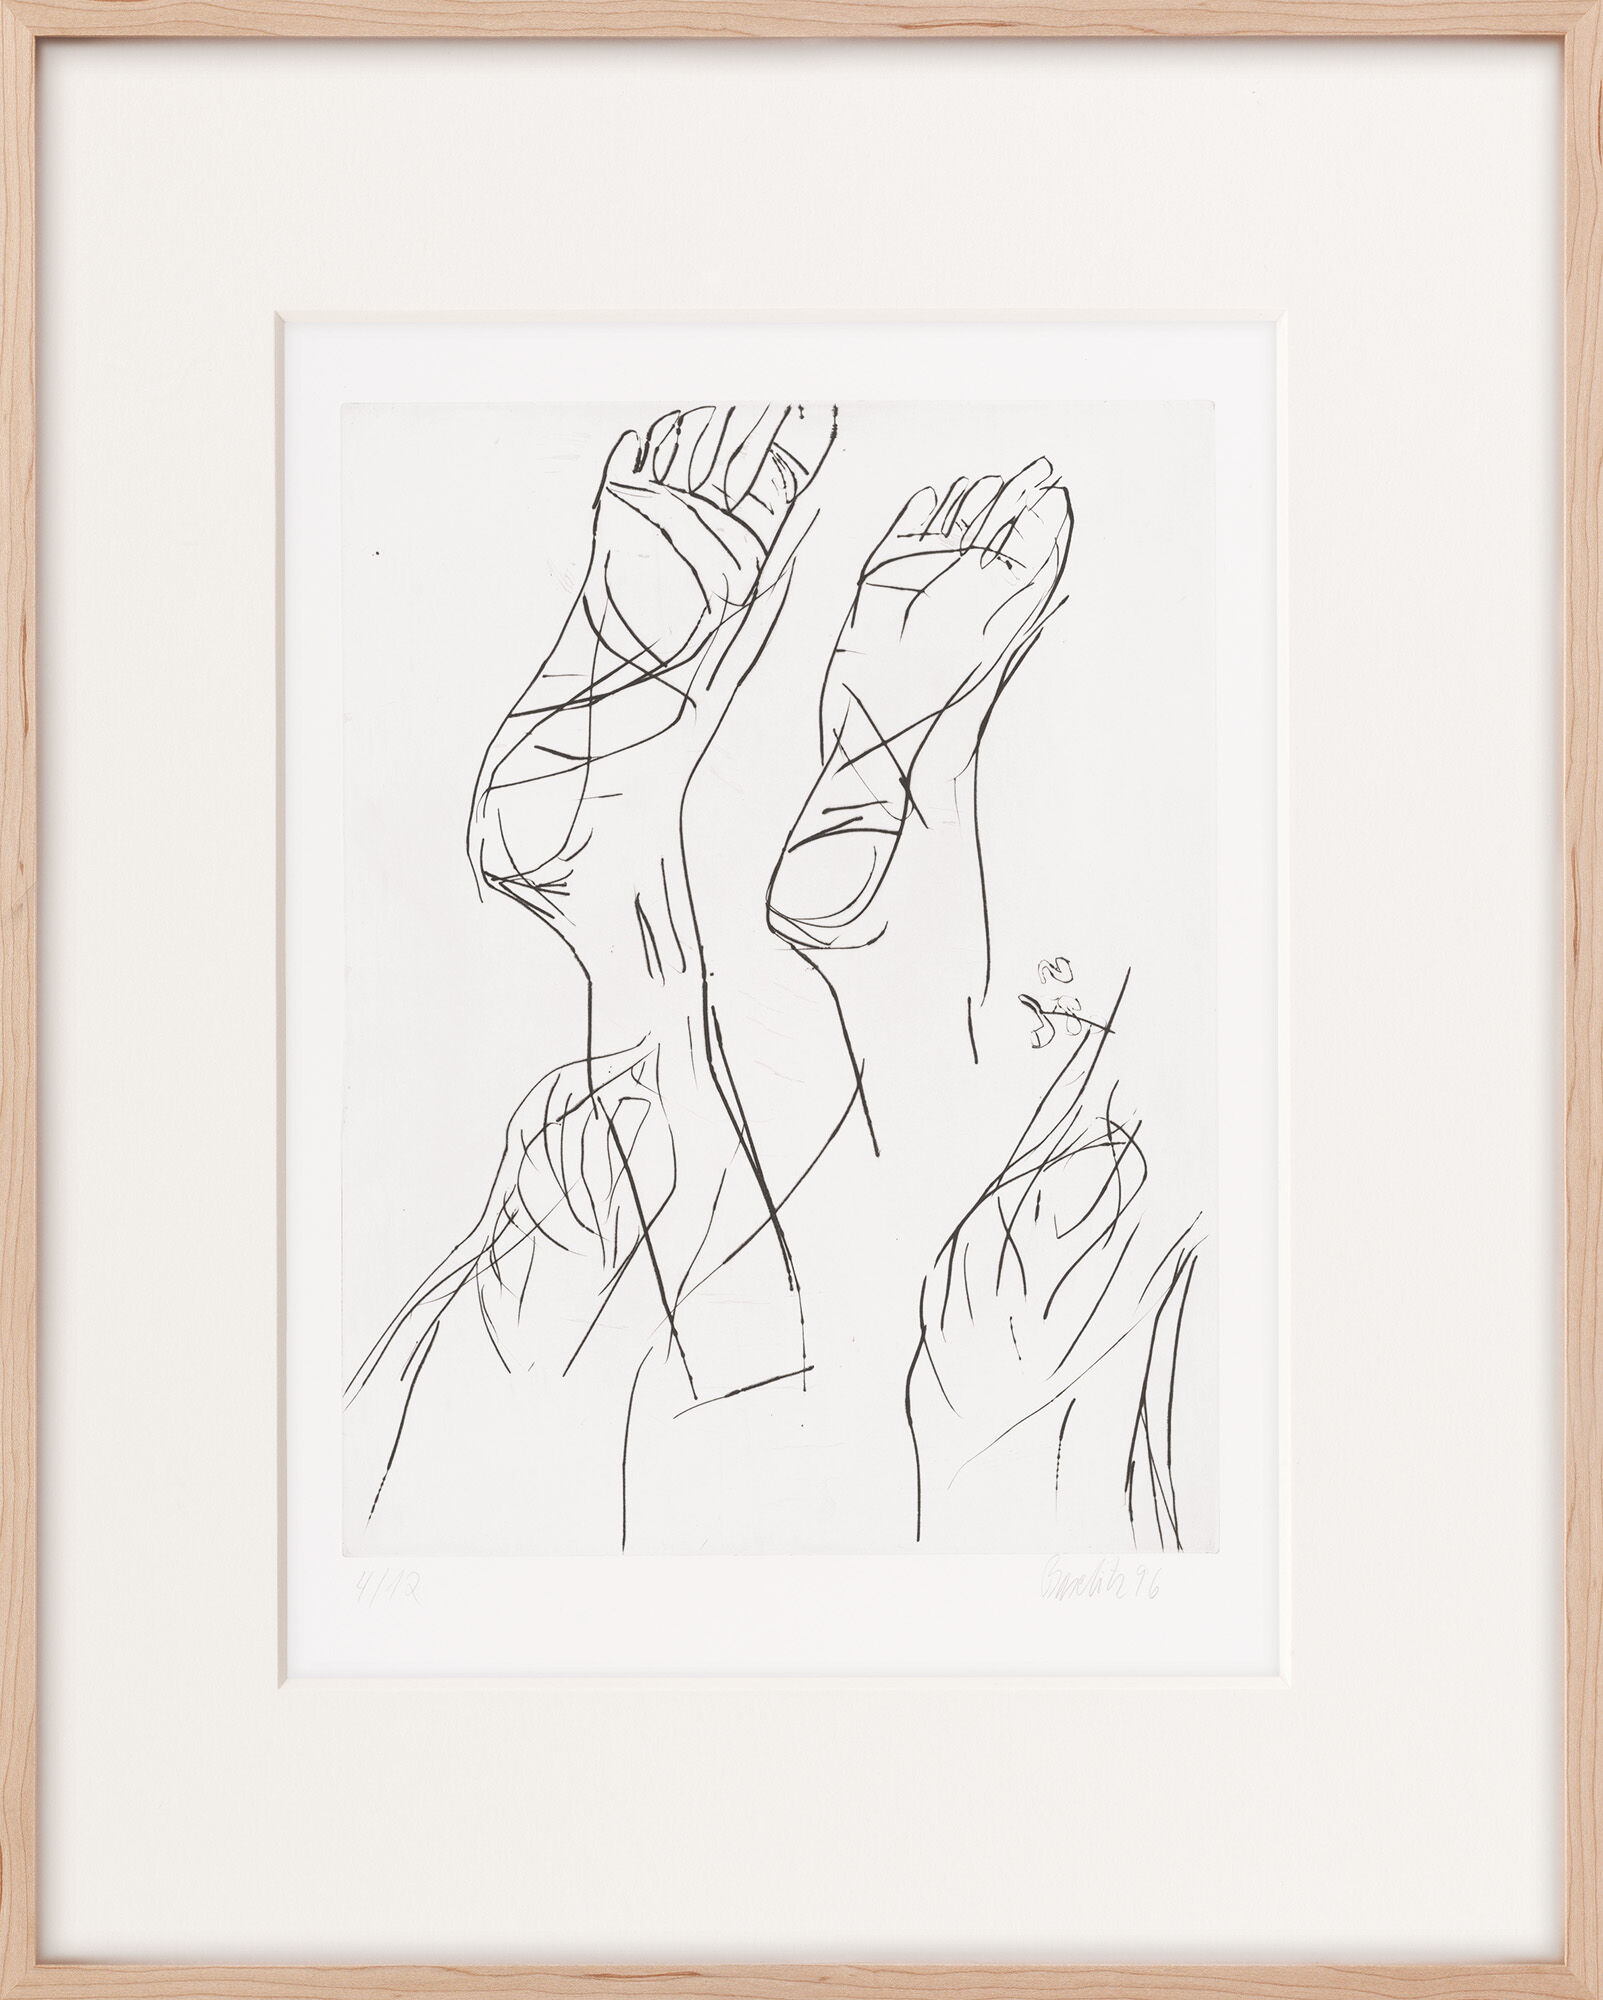 Picture "Foot + Knee" (1996/97) by Georg Baselitz